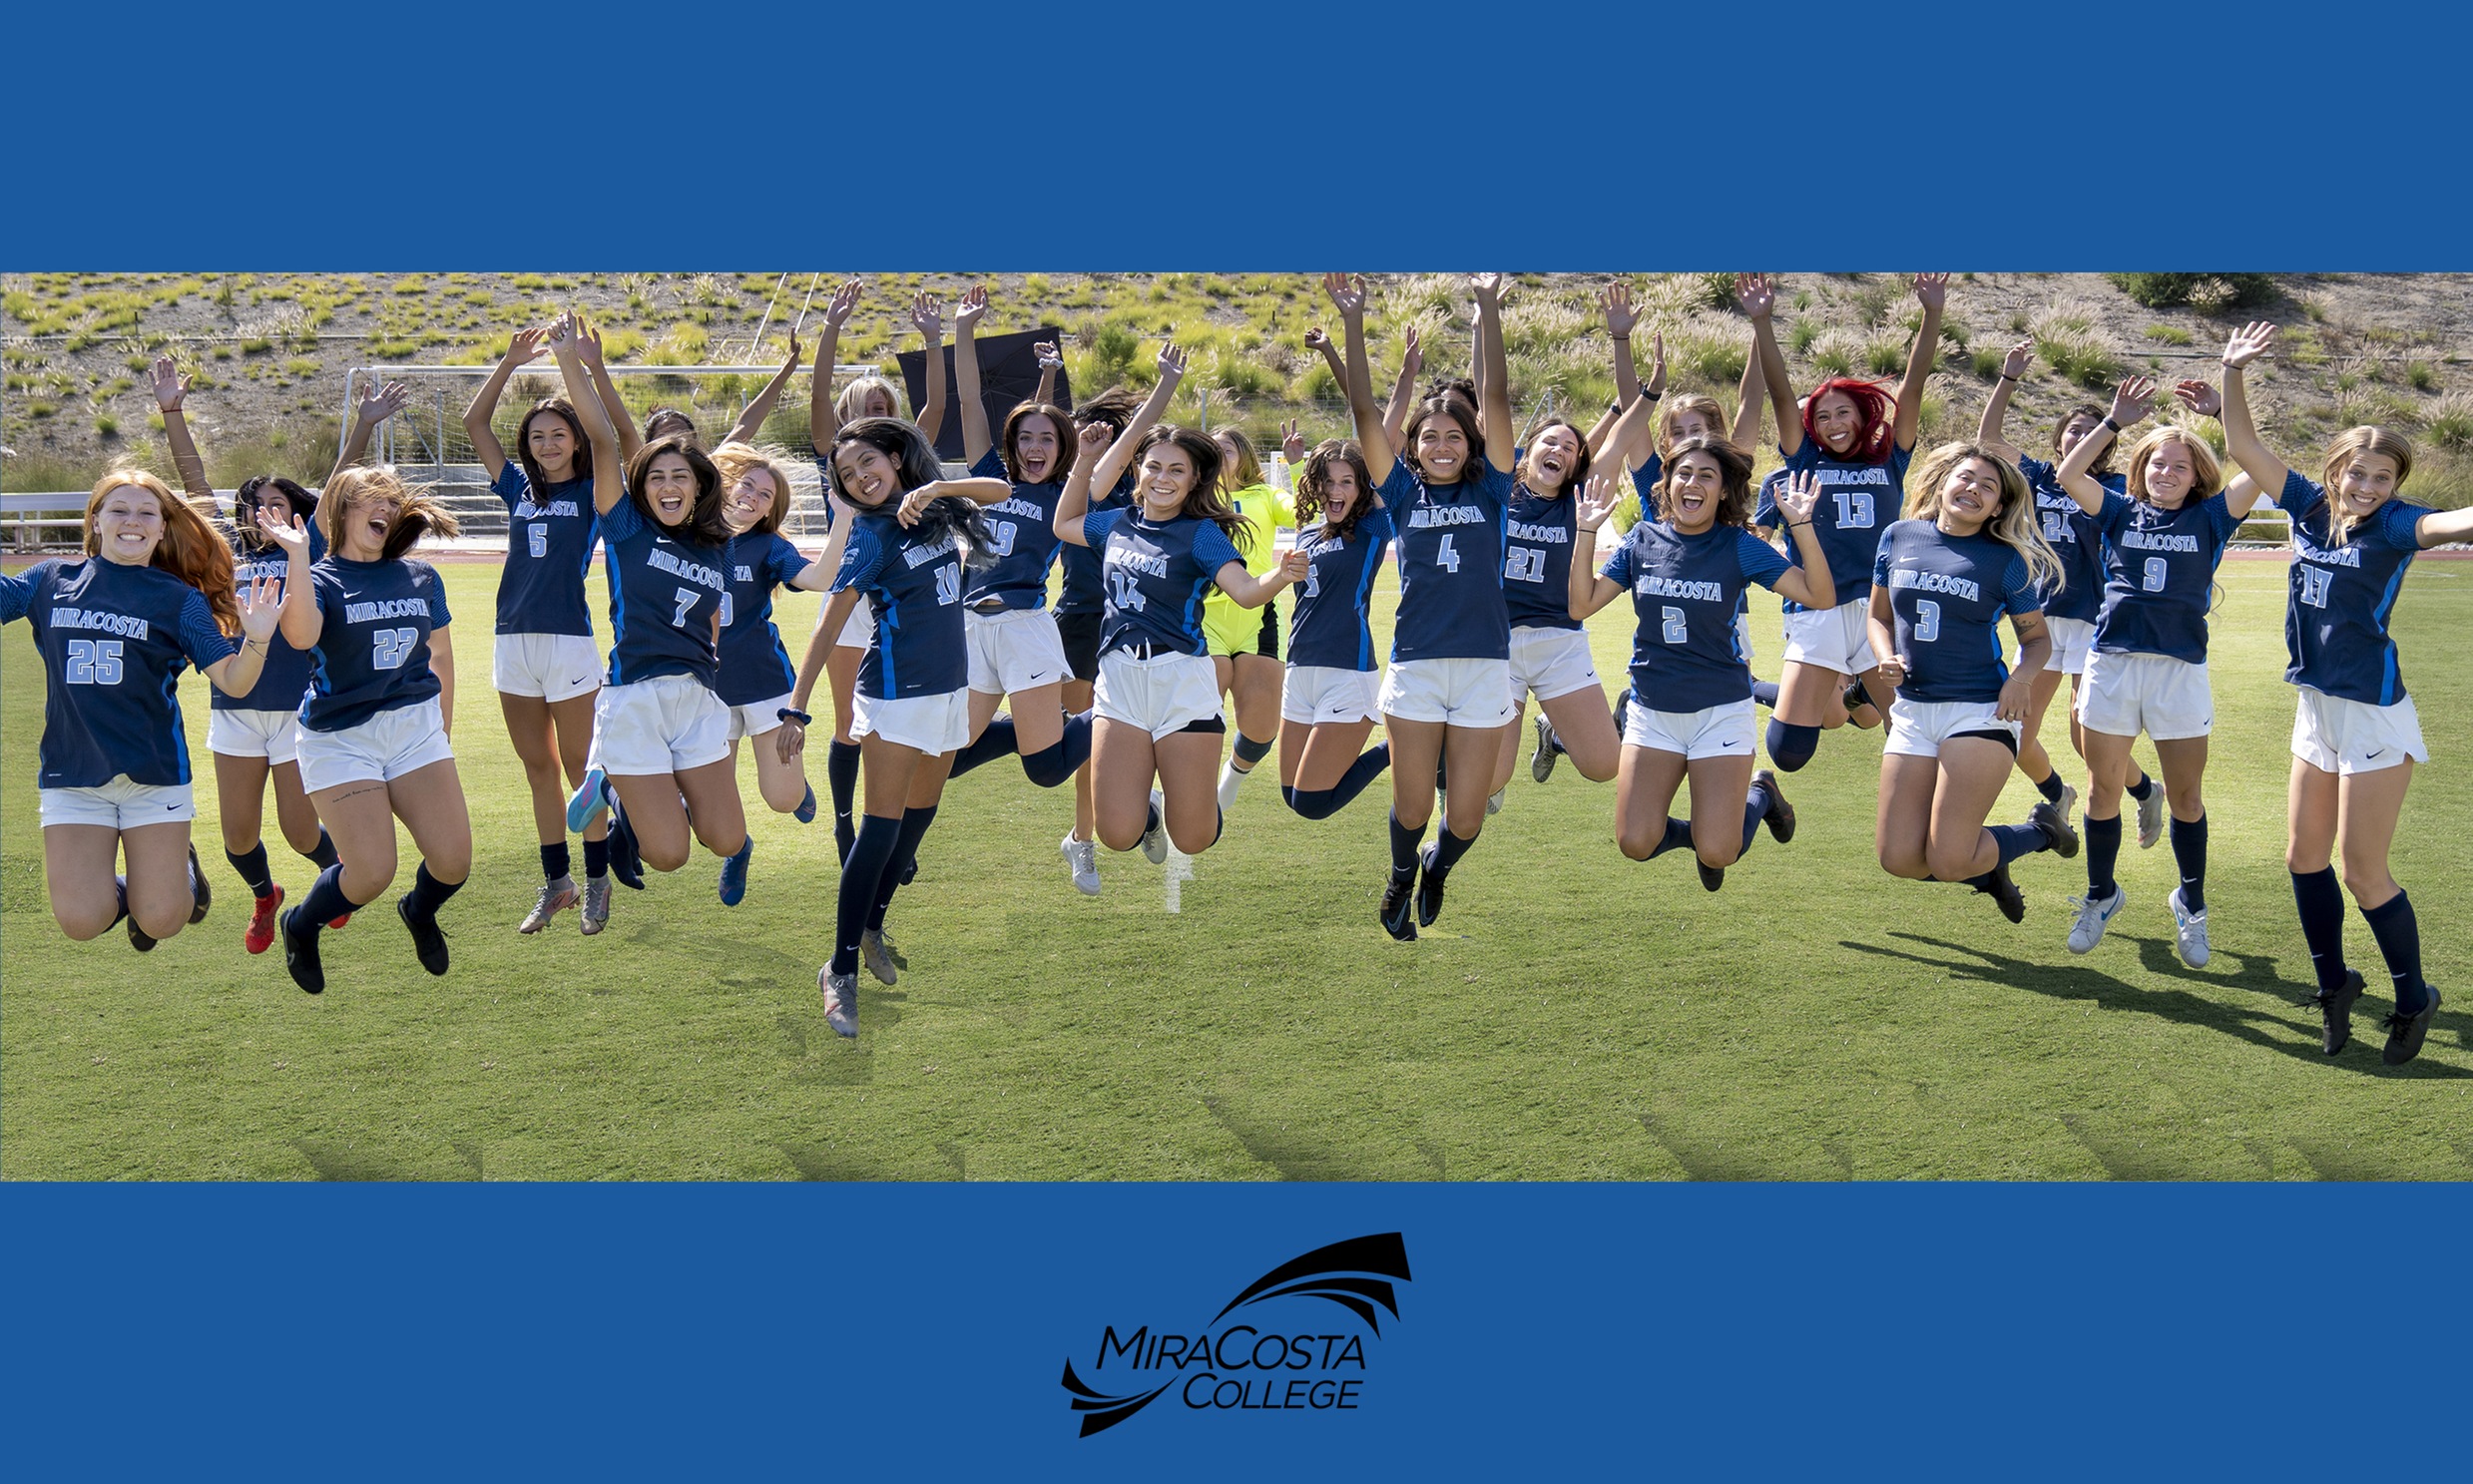 Women's soccer team, jump picture.